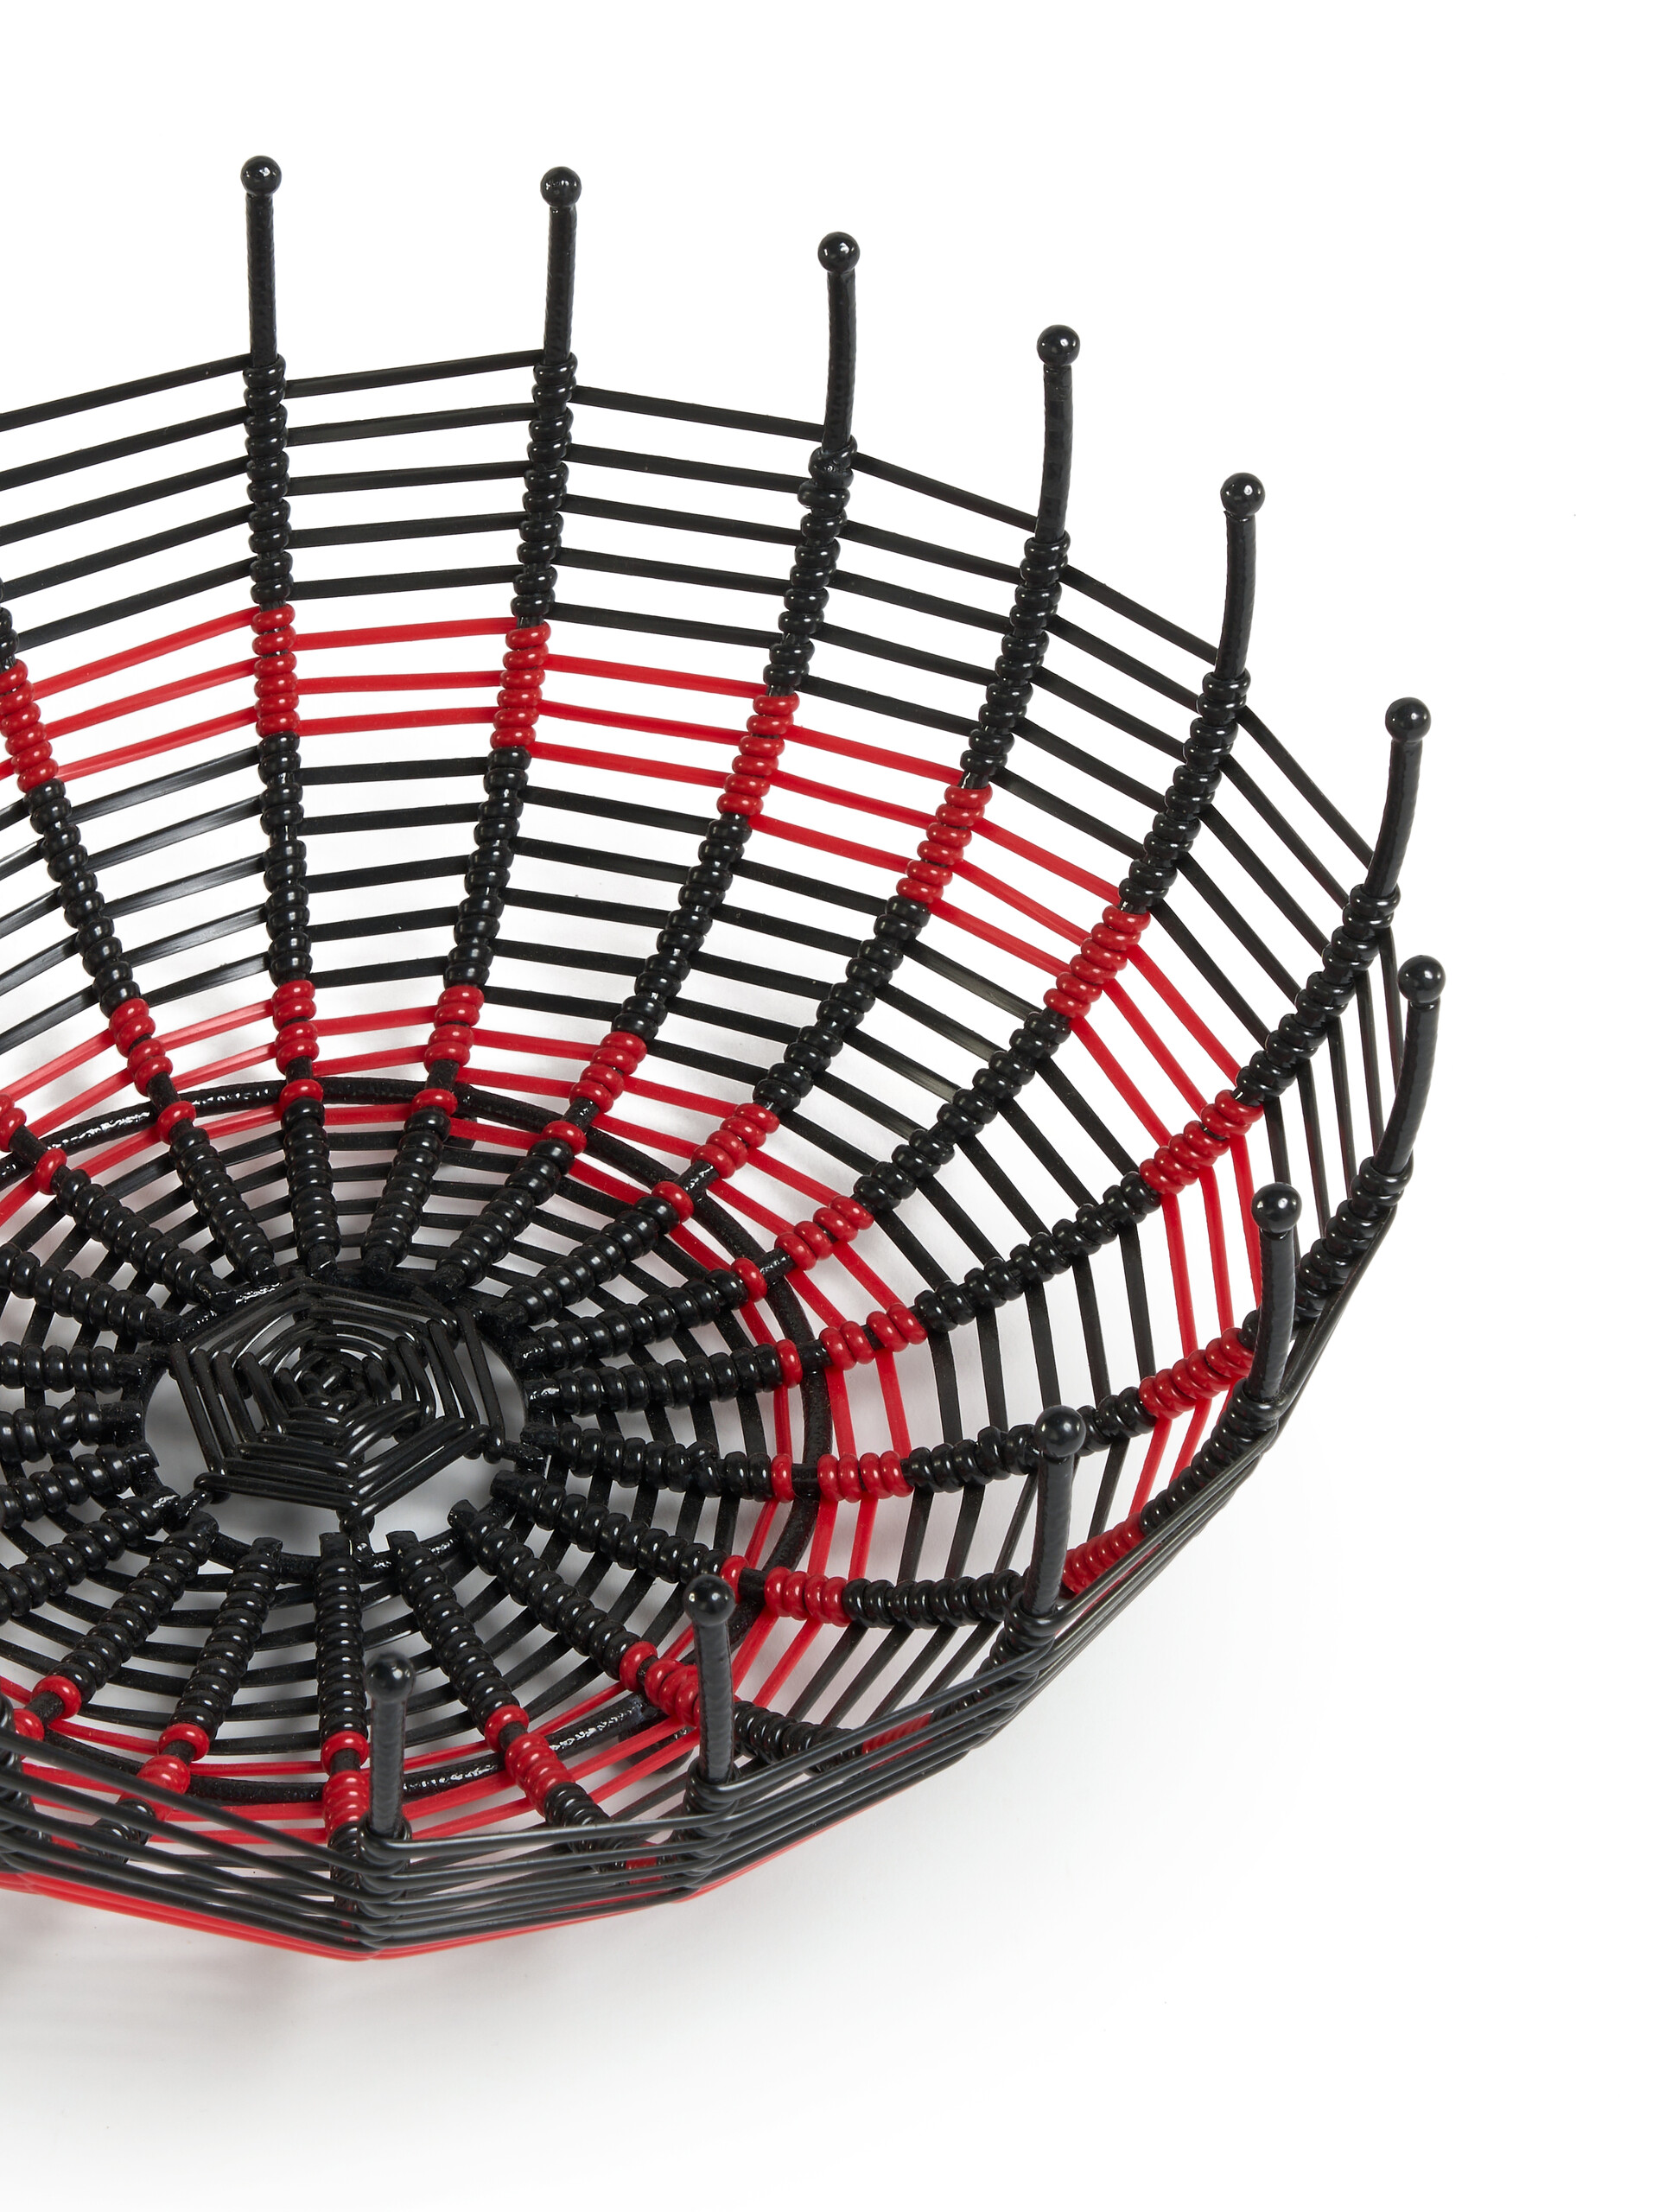 Red MARNI MARKET woven cable fruit basket - Accessories - Image 3